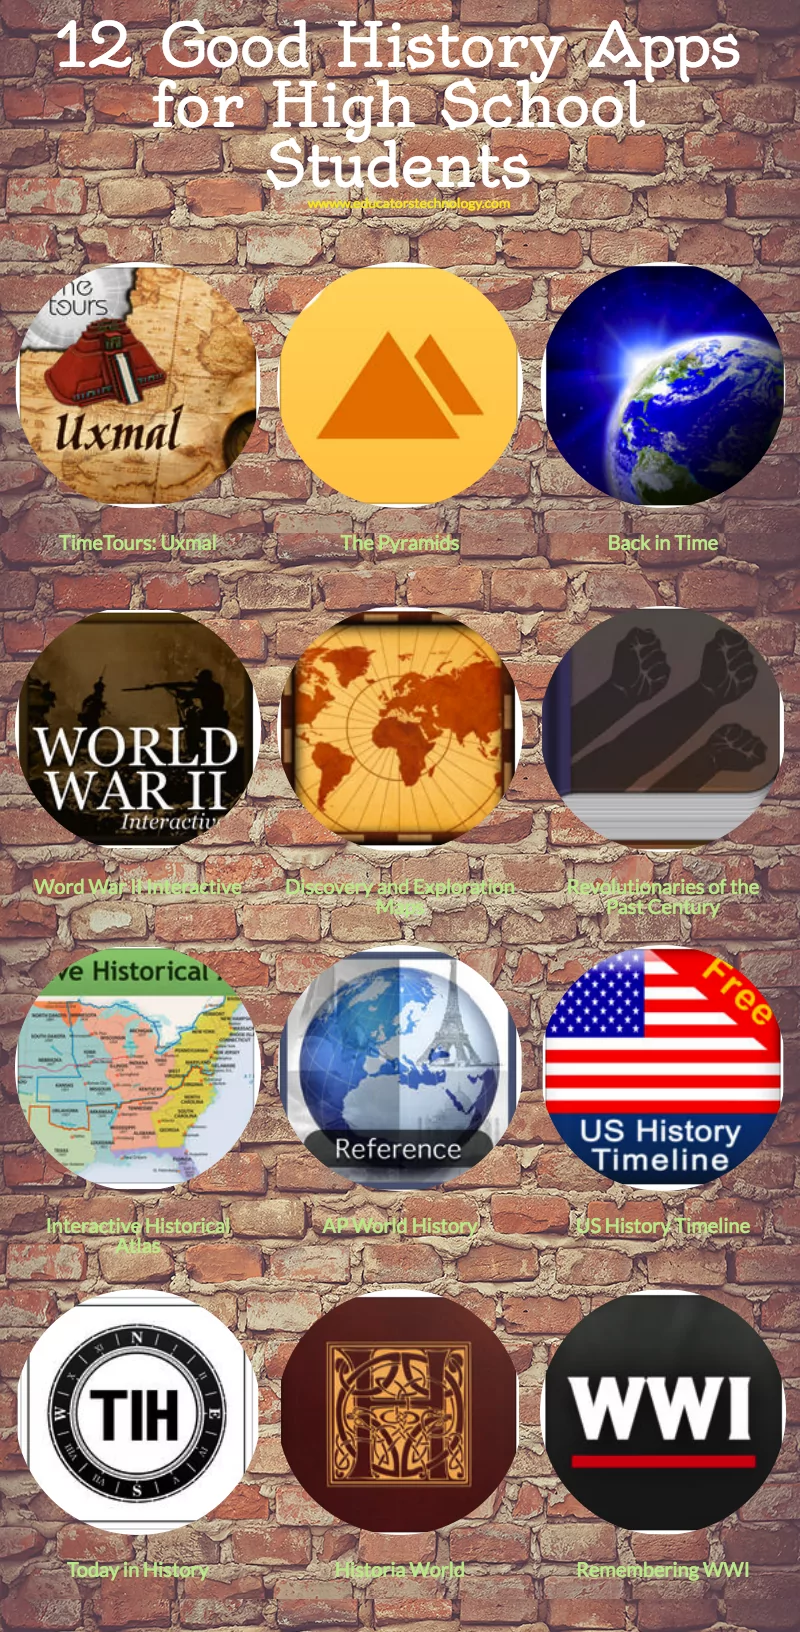 12 Good History Apps for High School Students